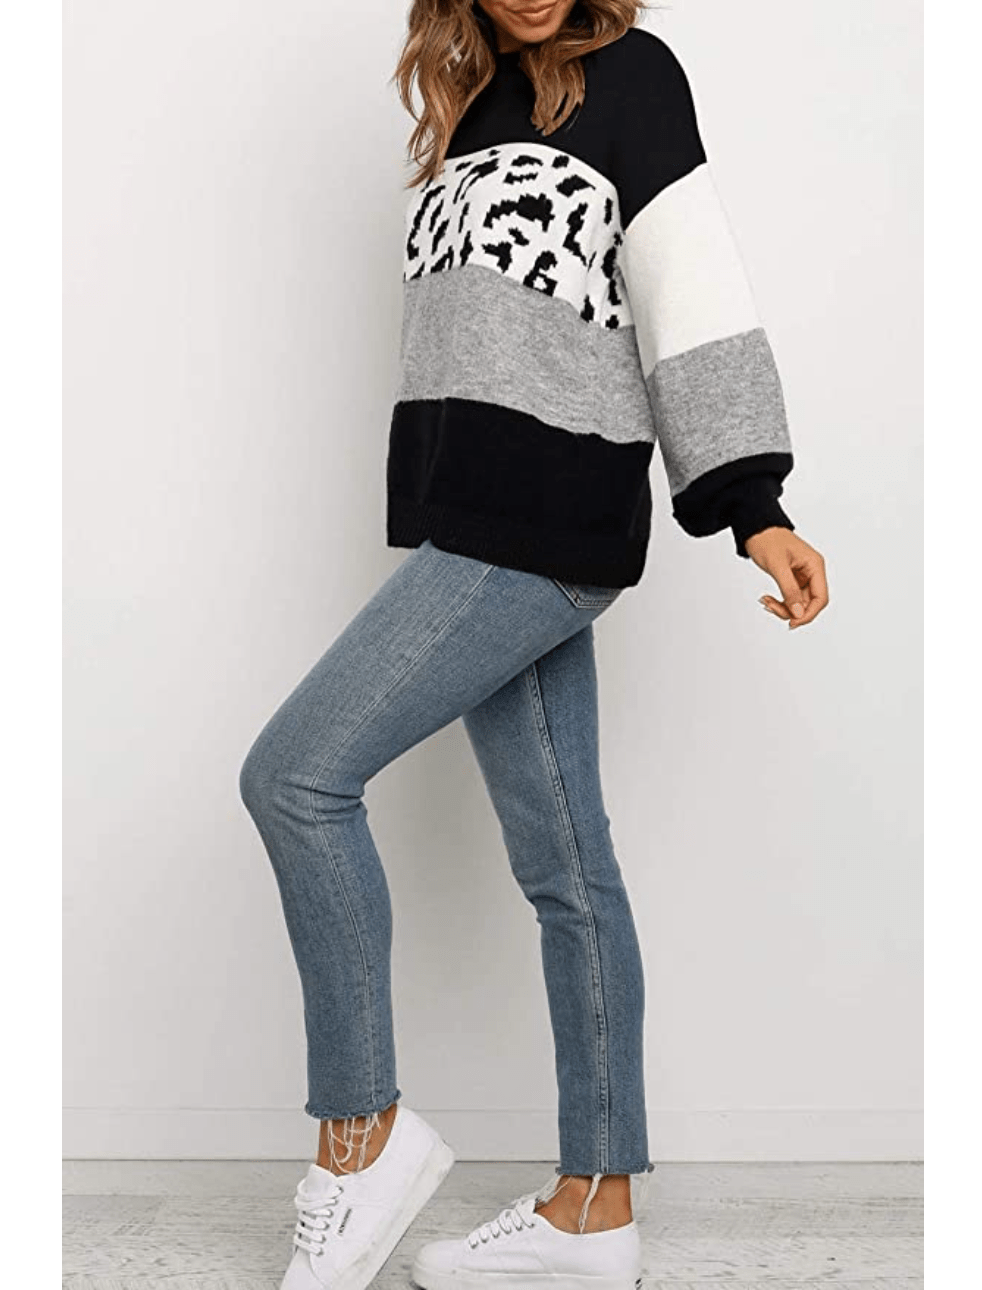 ZESICA Women's Striped Leopard Printed Long Sleeve Color Block Casual Knitted Pullover Sweater